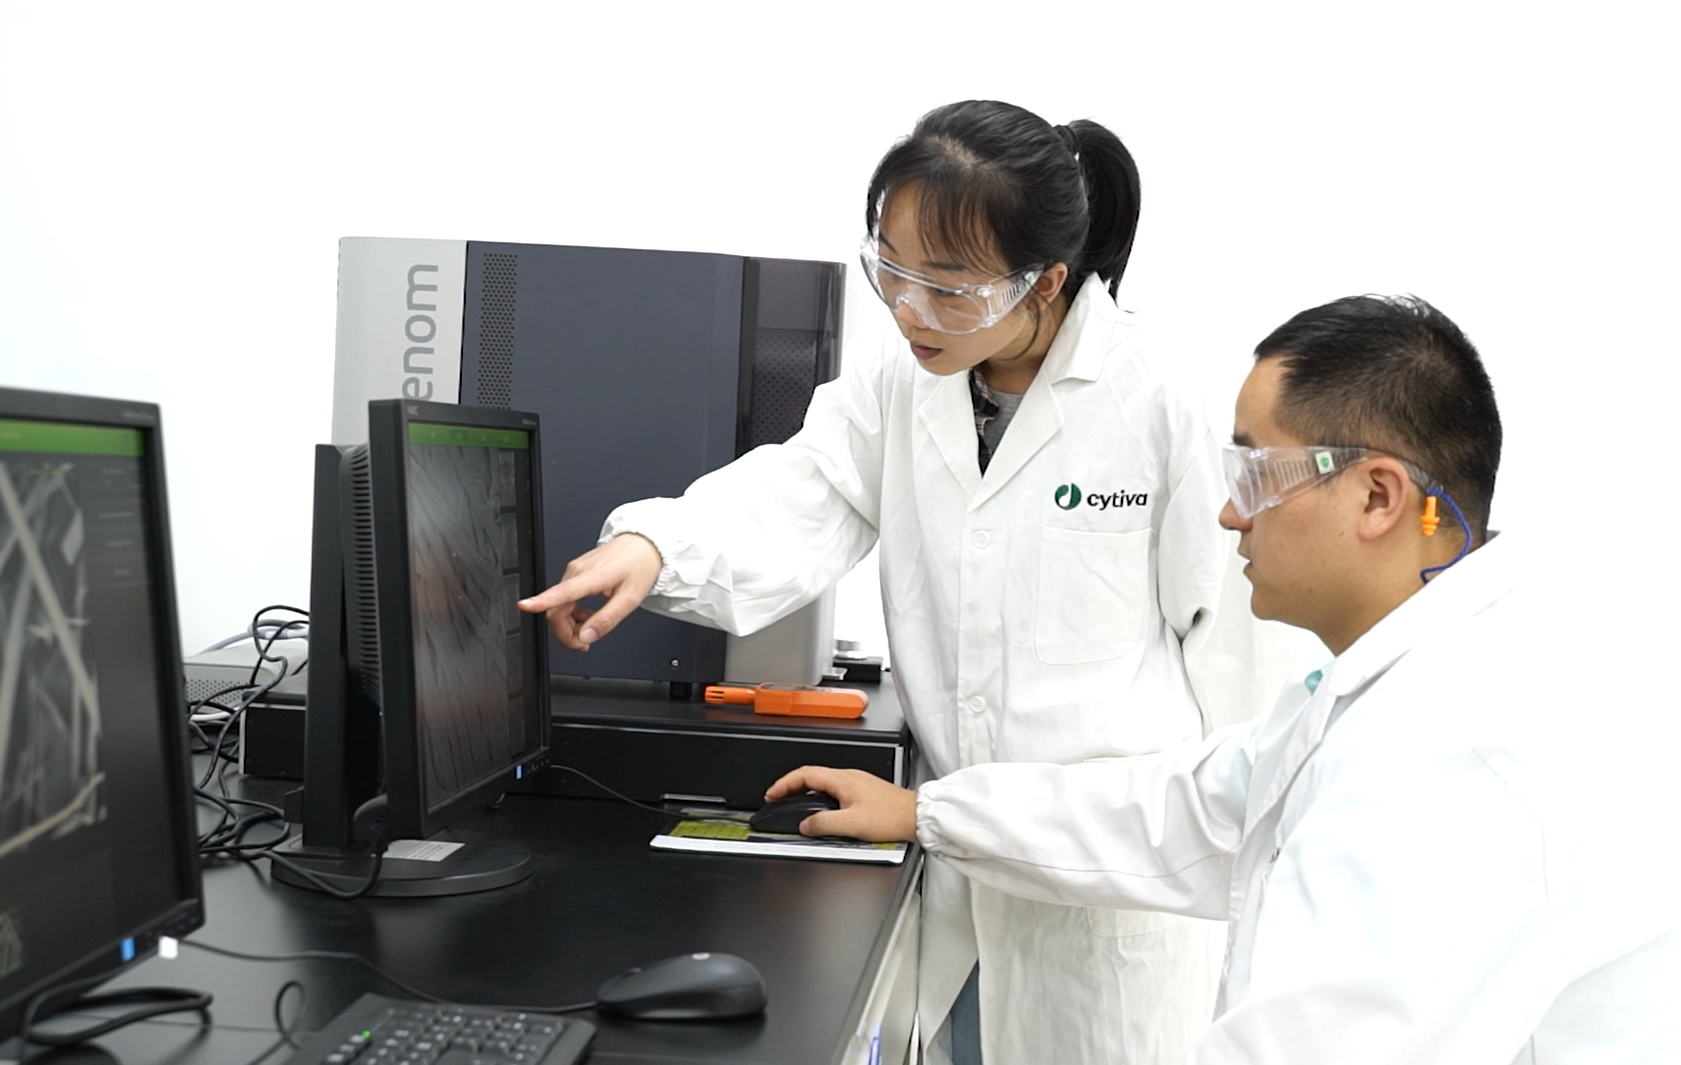 Scientists at the lab work in Tonglu, situated in East China, a World Class Manufacturing site for filter paper.